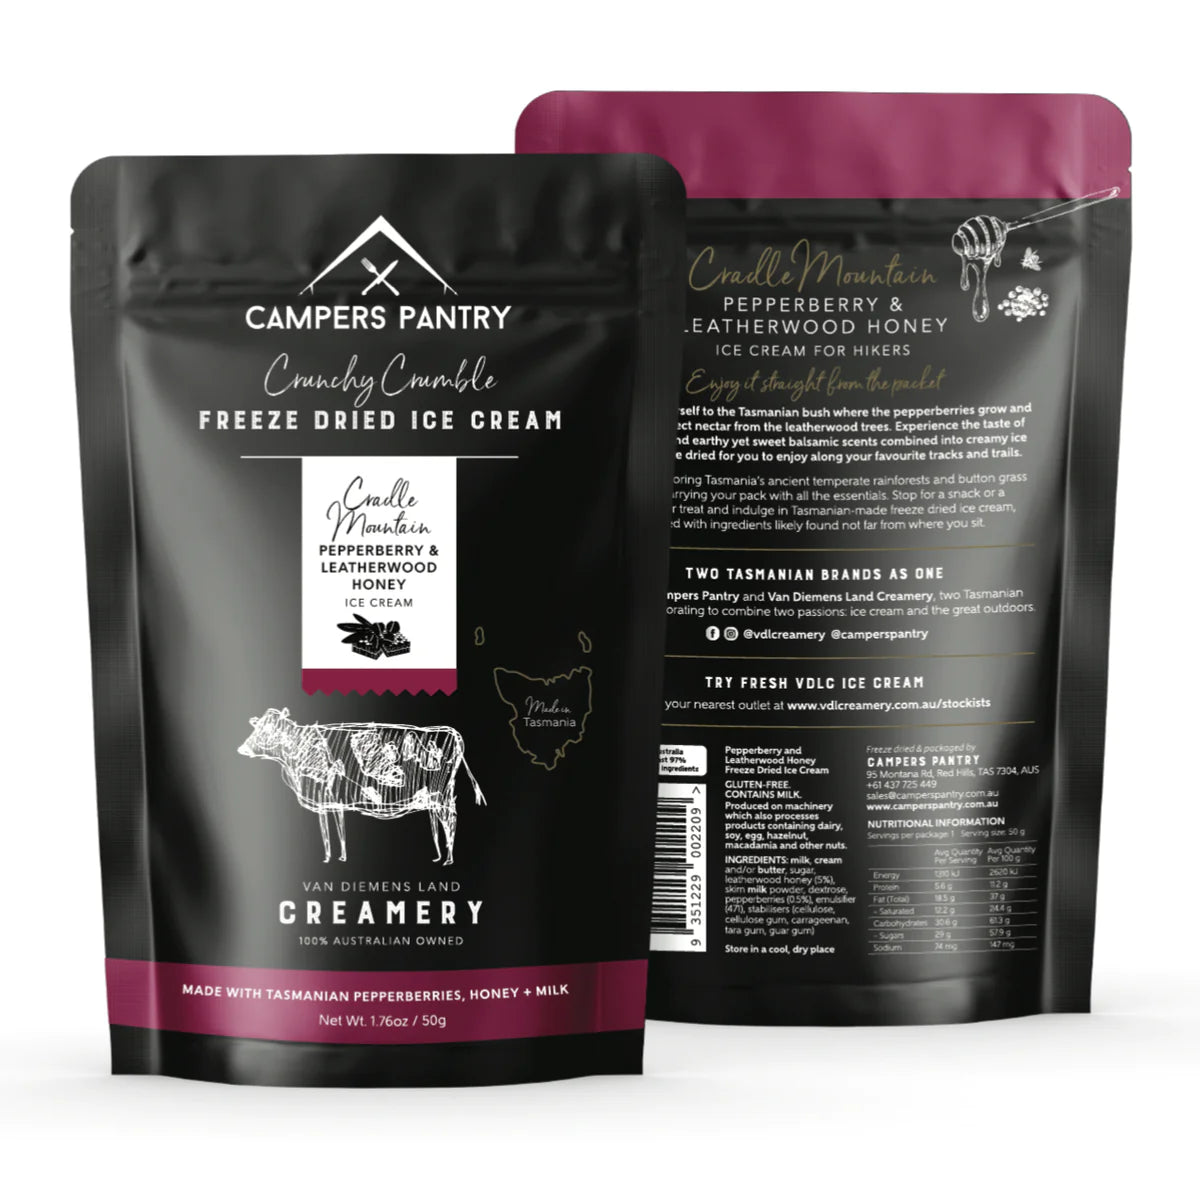 Campers Pantry Freeze Dried Ice Cream - Pepperberry & Leatherwood Honey